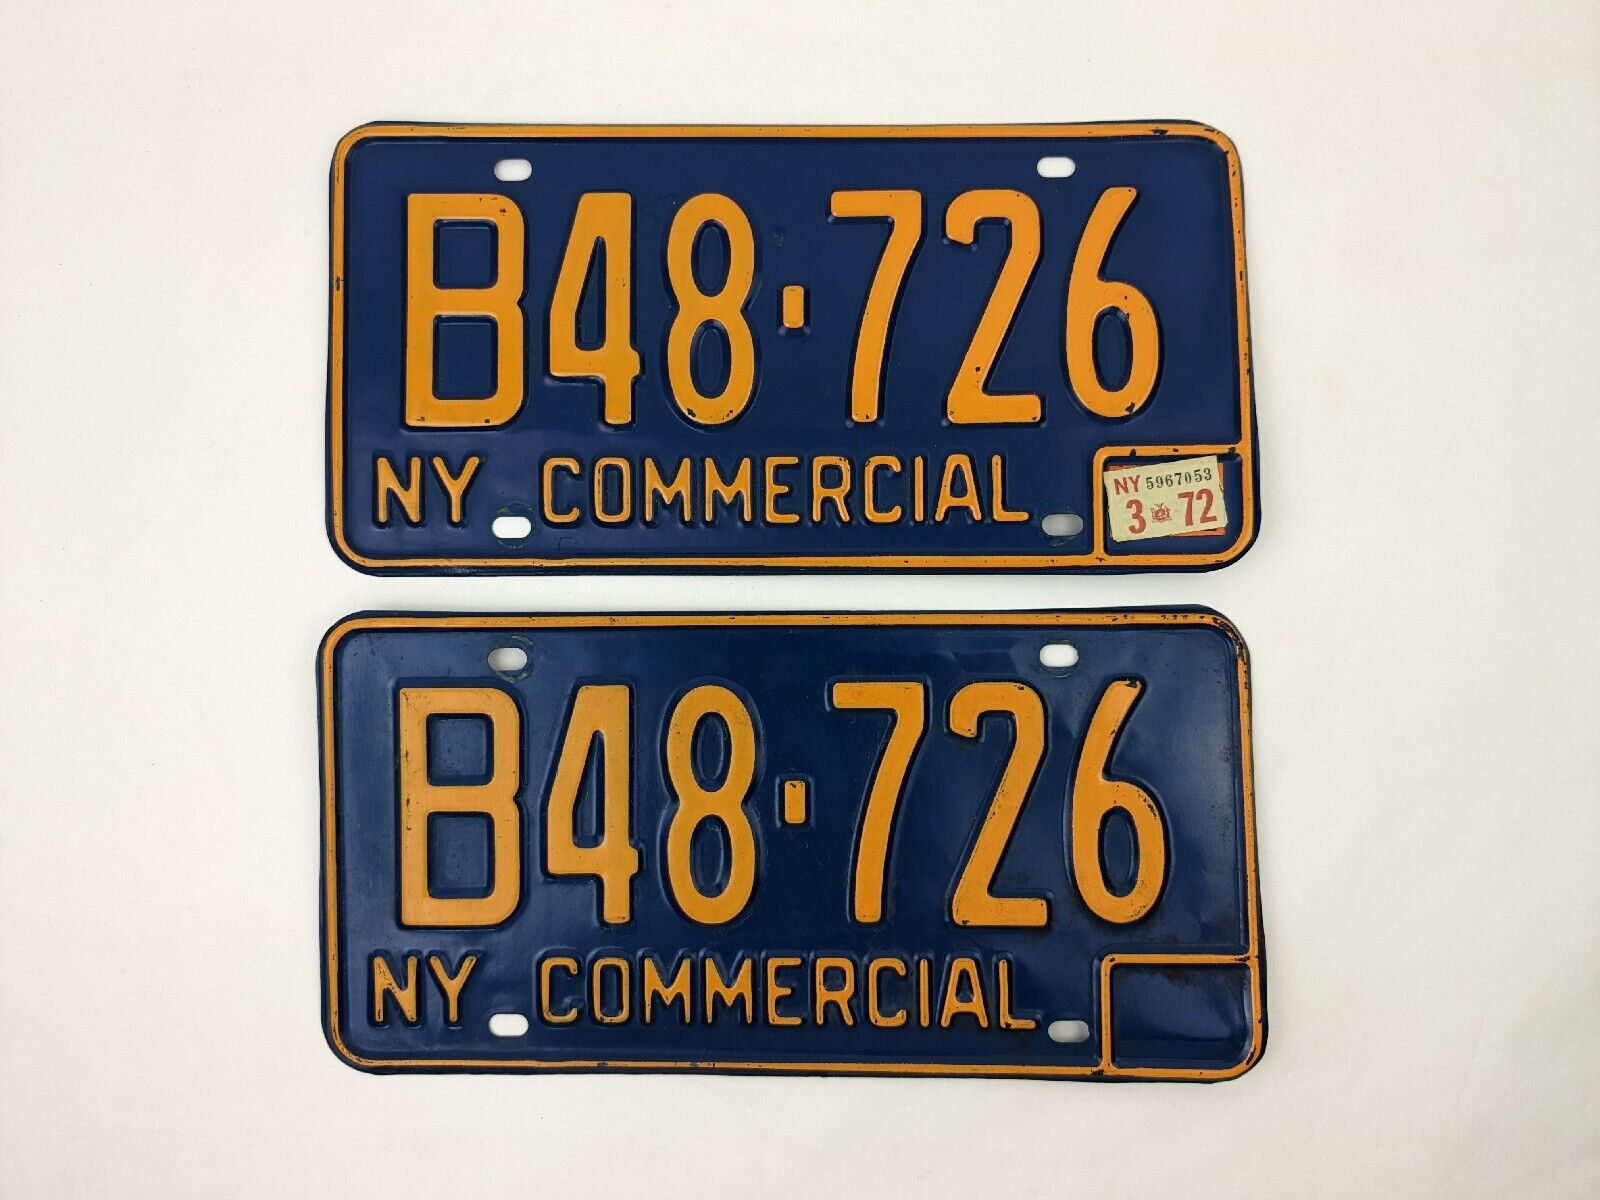 Vtg New York '66-'73 Commercial License Plates Matching Pair B48-726 Blue Yellow